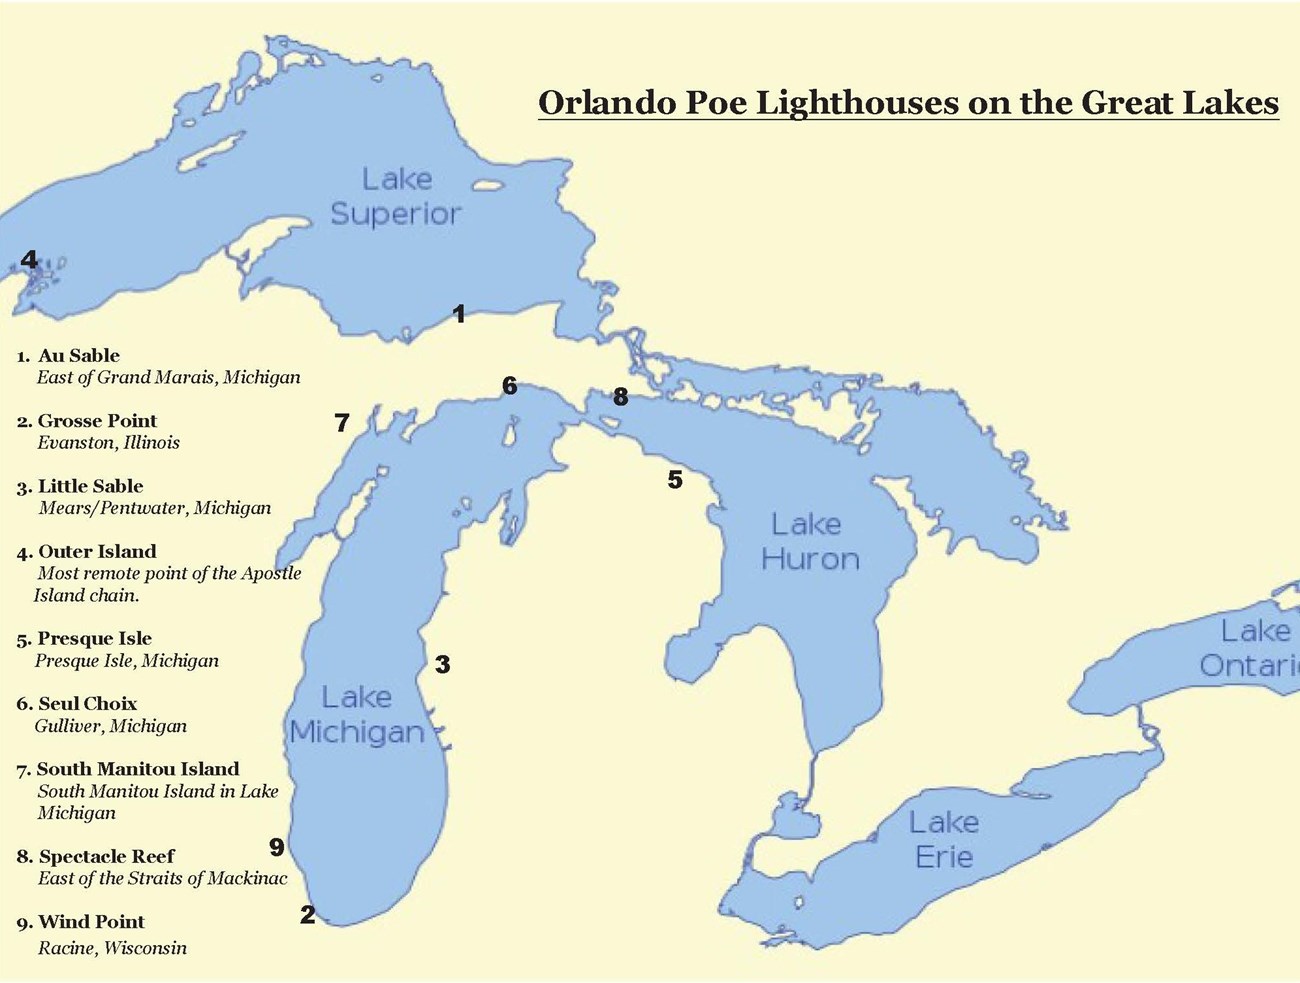 Map of the state of Michigan with Orlando Poe's lighthouses labeled in numbers around the map.